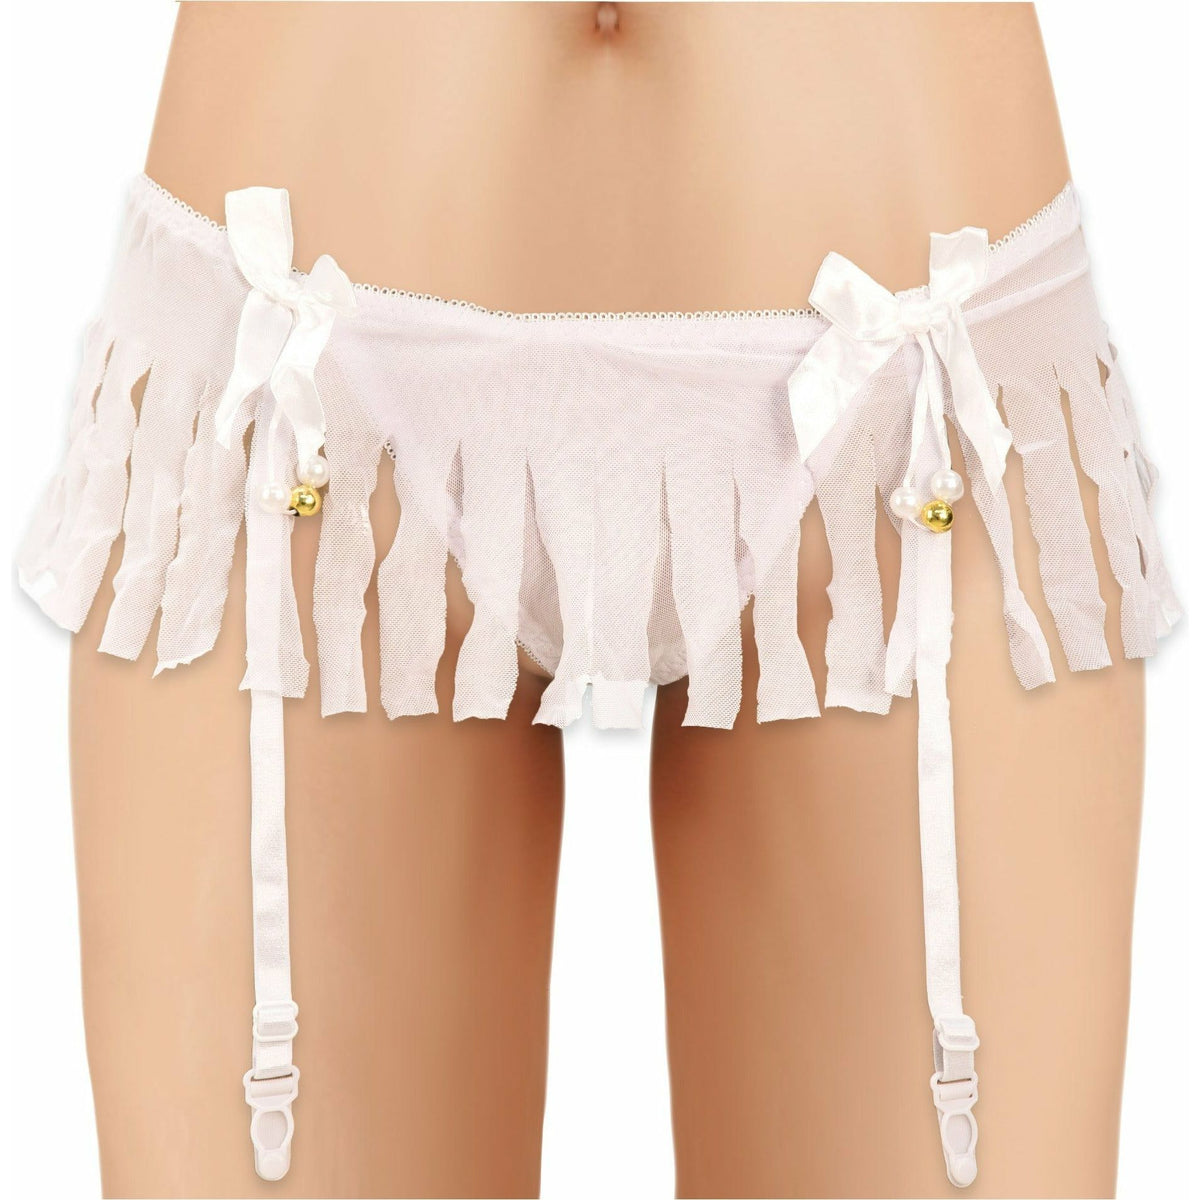 Sexy Underwear with Pearls - White - O/S